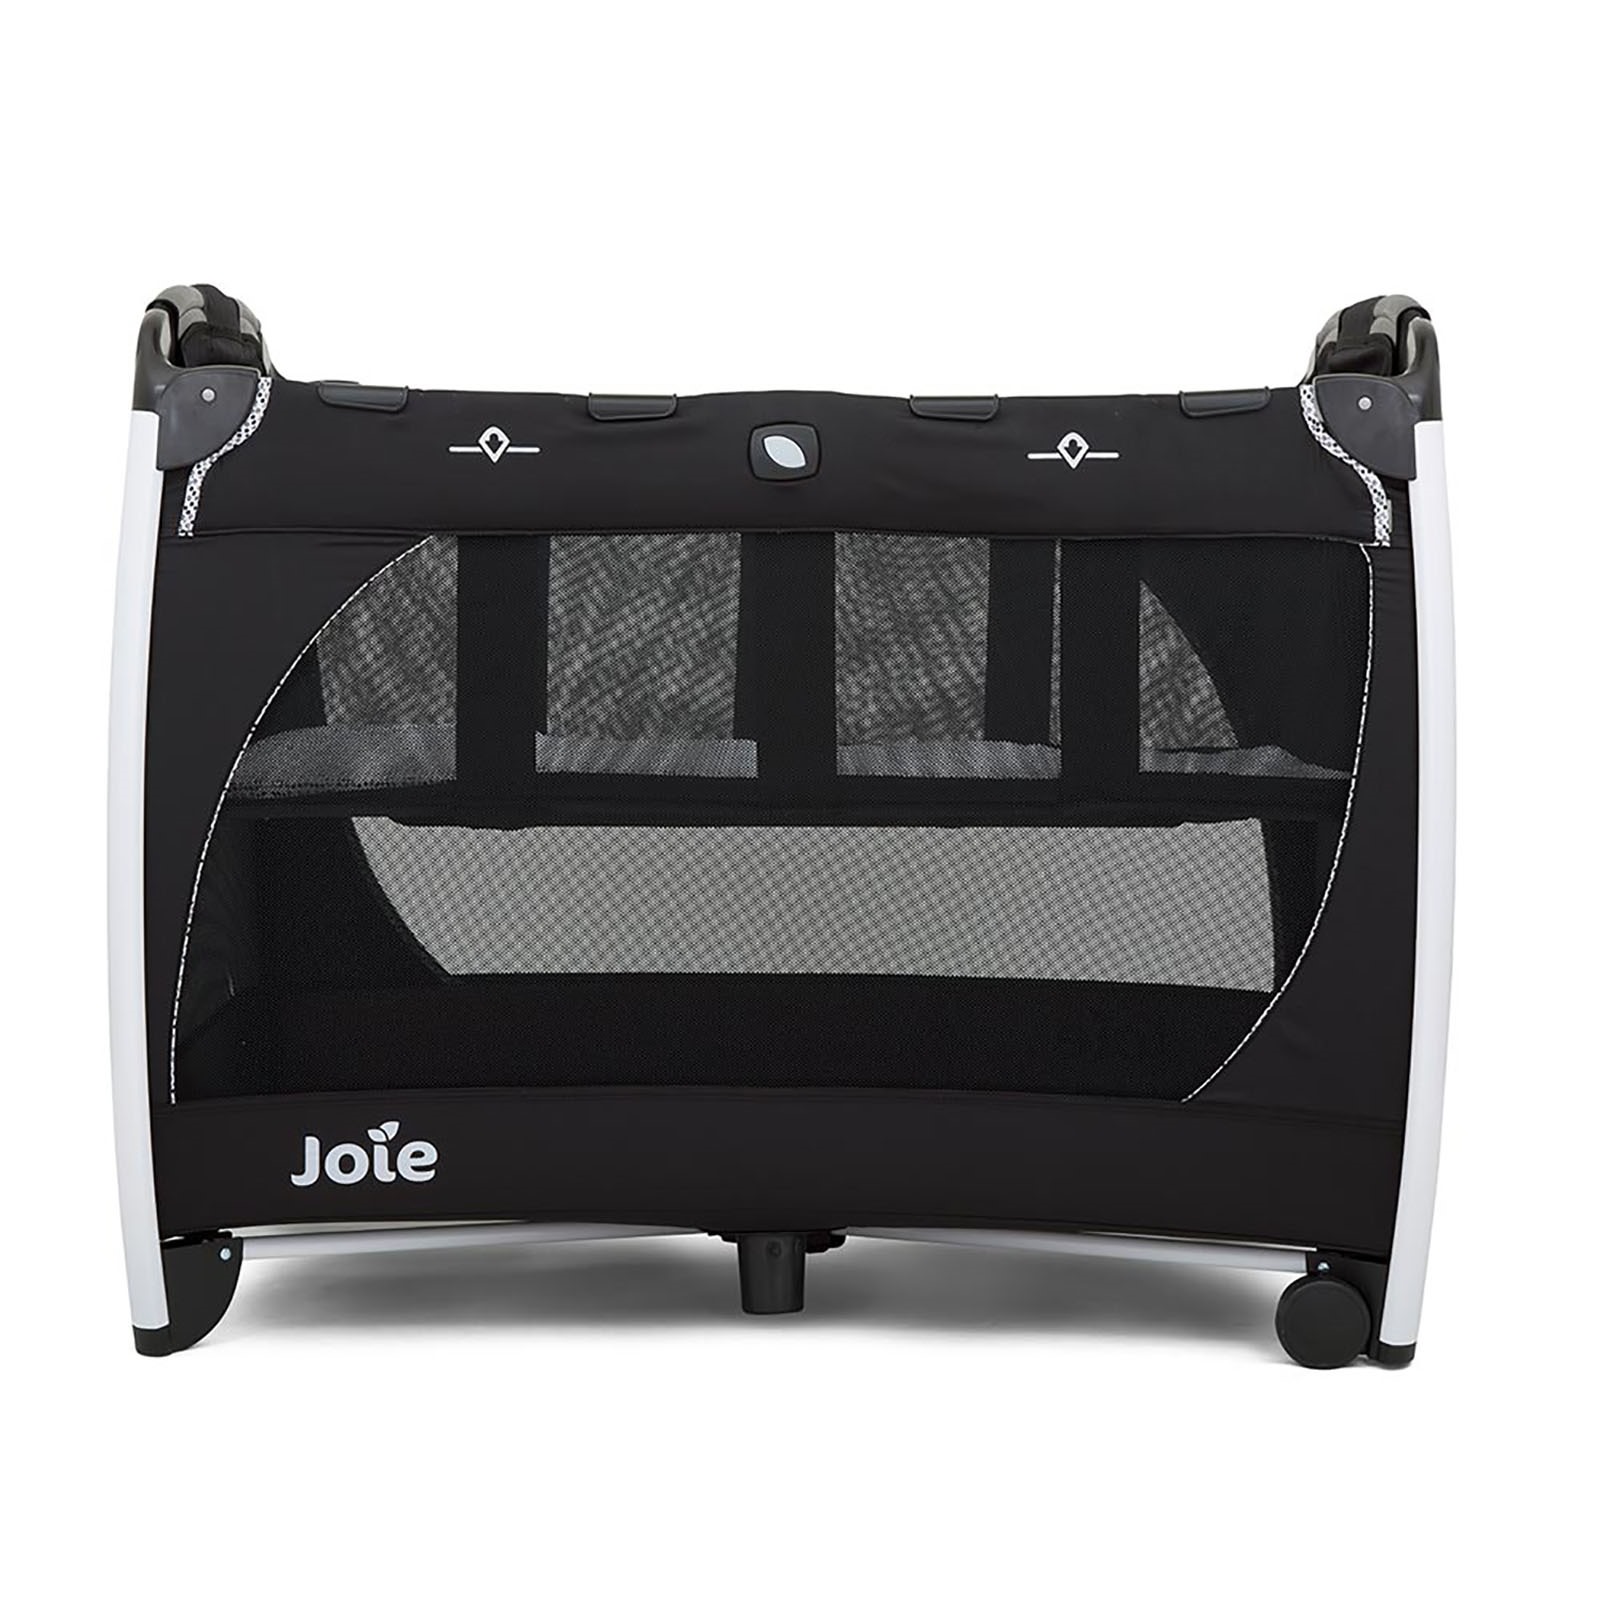 joie changing table